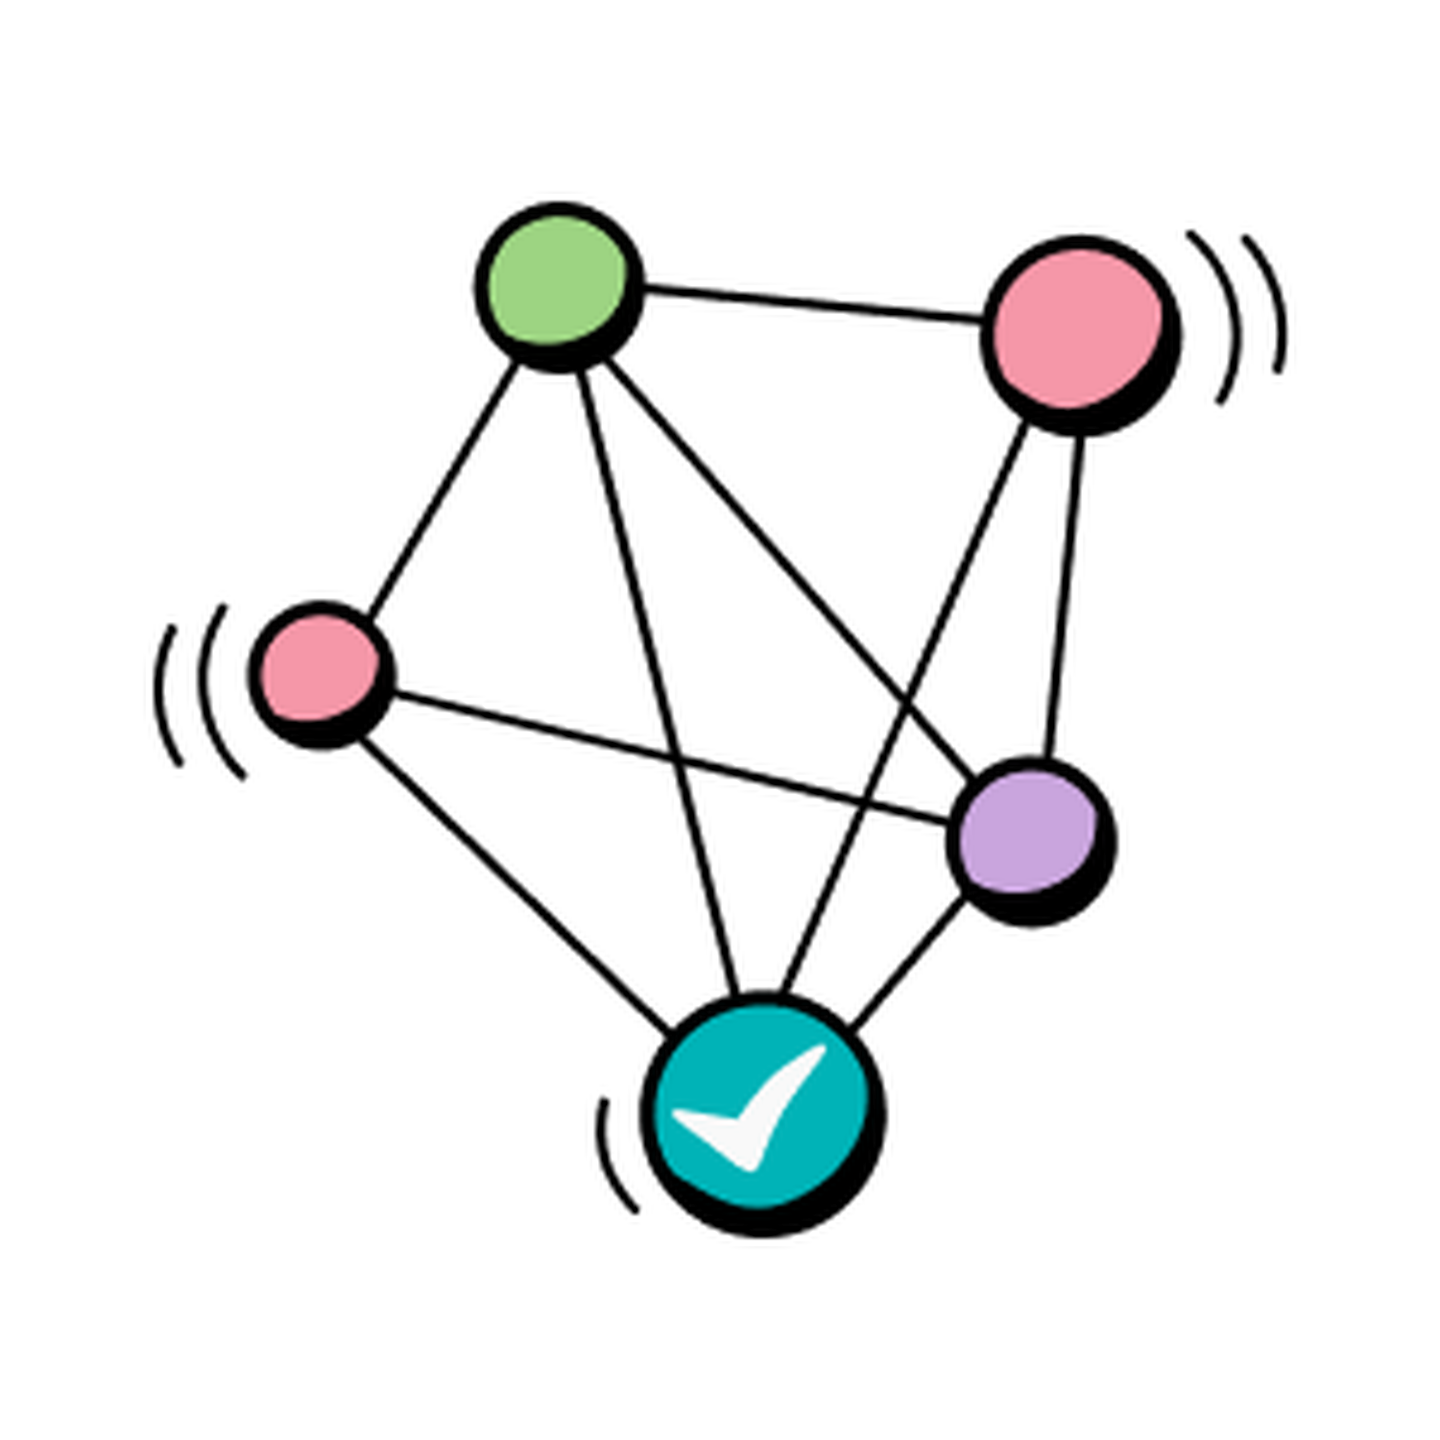 Illustration of 5 pastel coloured balls interconnected by lines, the biggest blue ball has a white checkmark